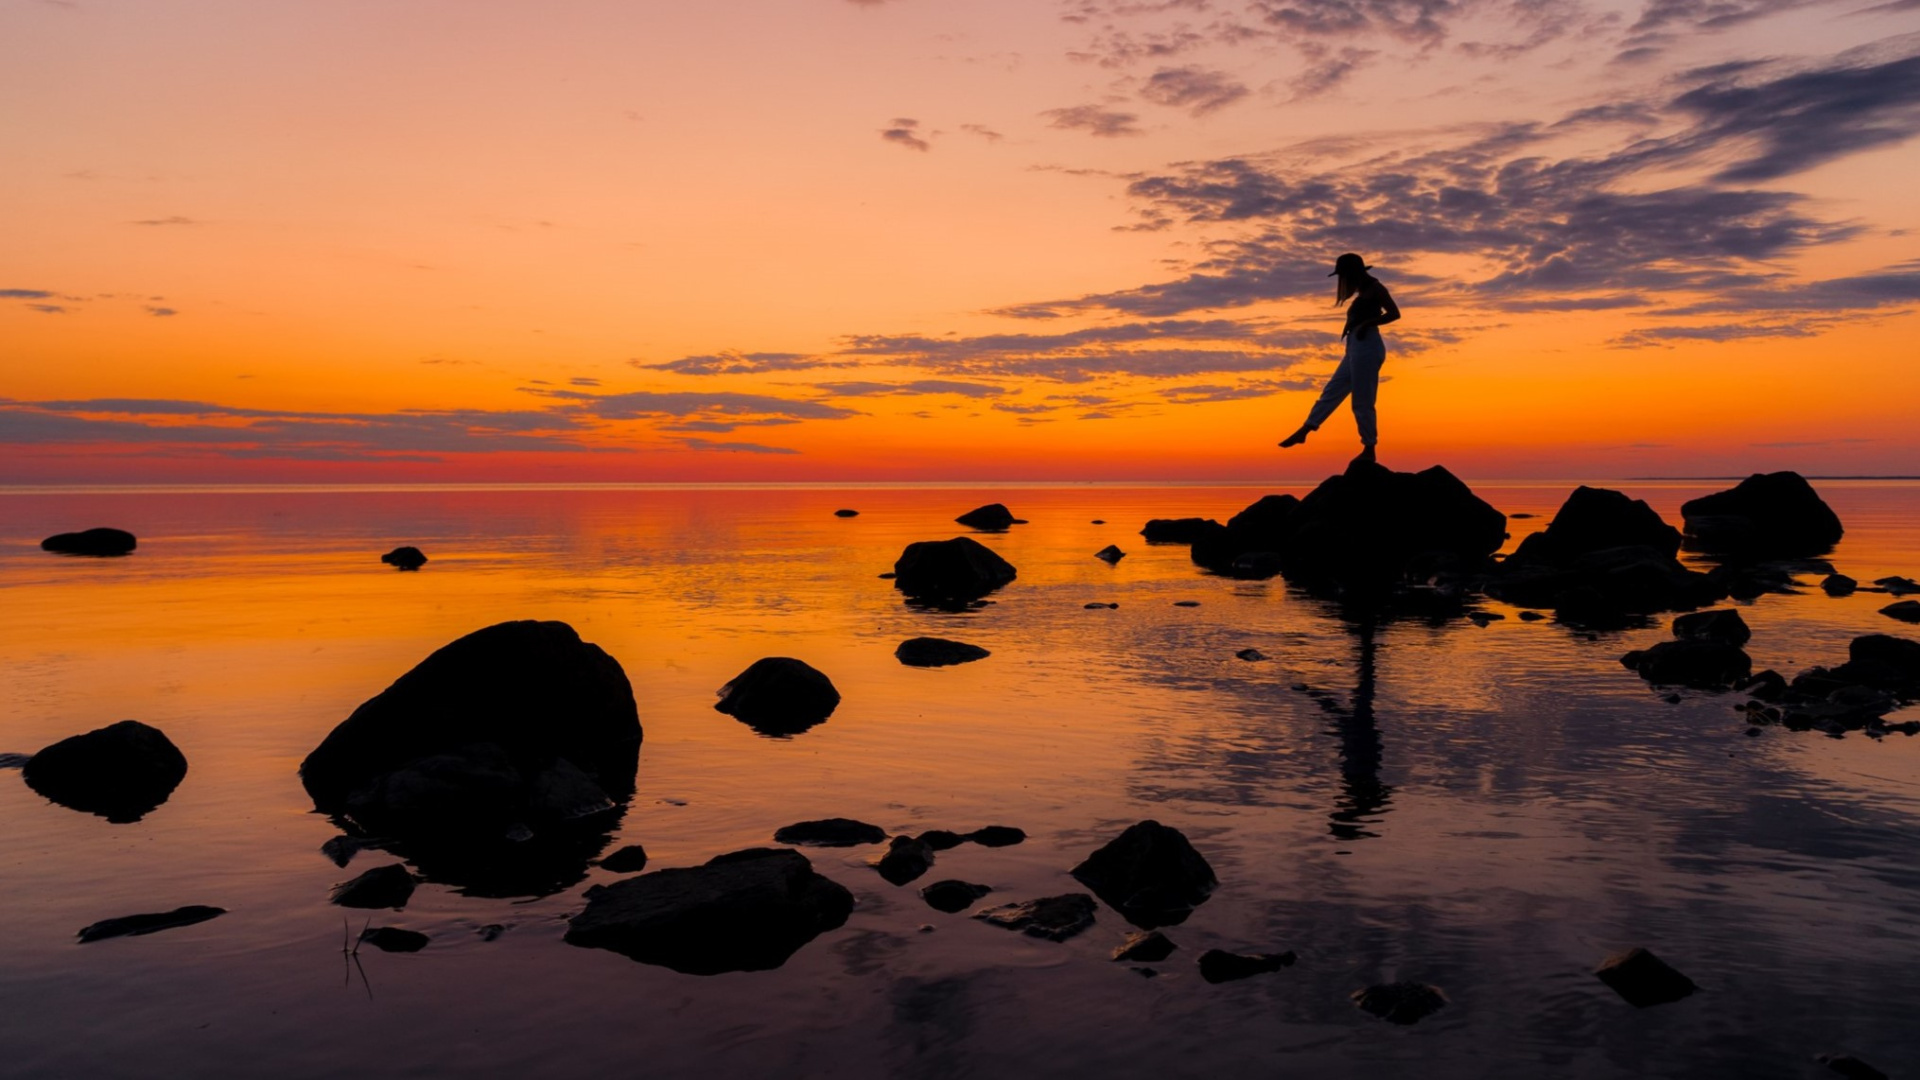 A person standing on a rock in a seashore at the time of sunrise